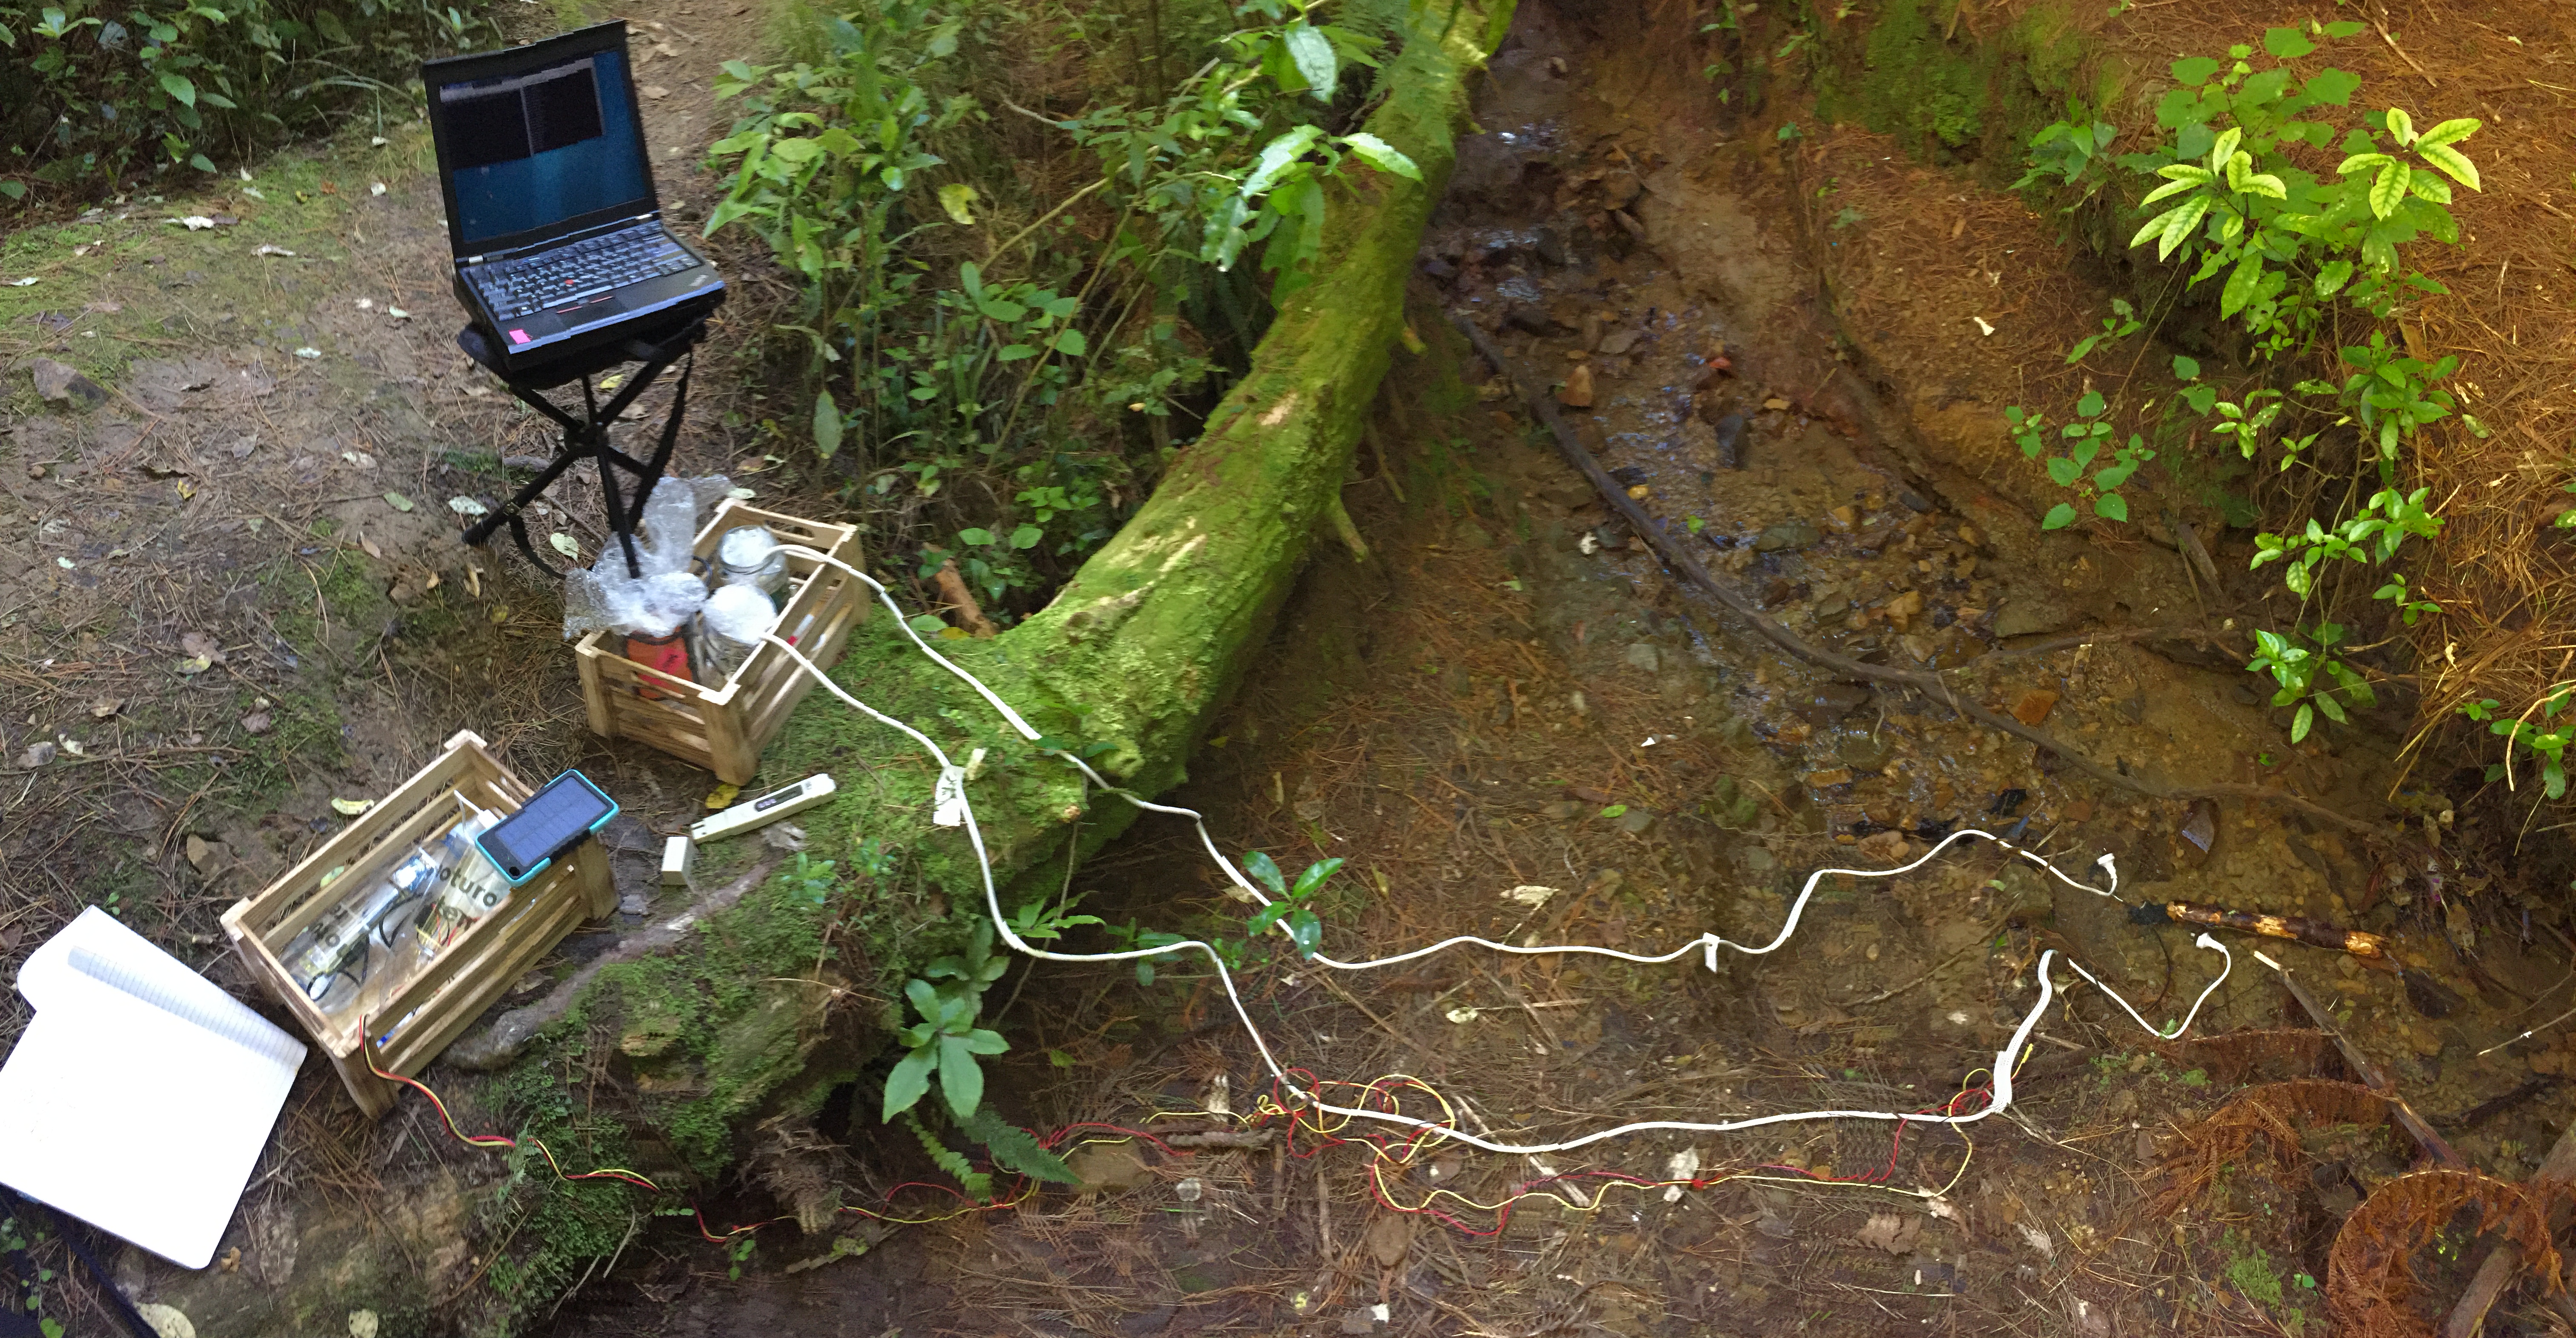 Panorama of experiment setup showing a latop on a stool on the left side. Next to the stool are two wooden crates with glass jars containing electronics. Three probes are submersed in the stream visible on the right side. Cables can be seen on the ground.